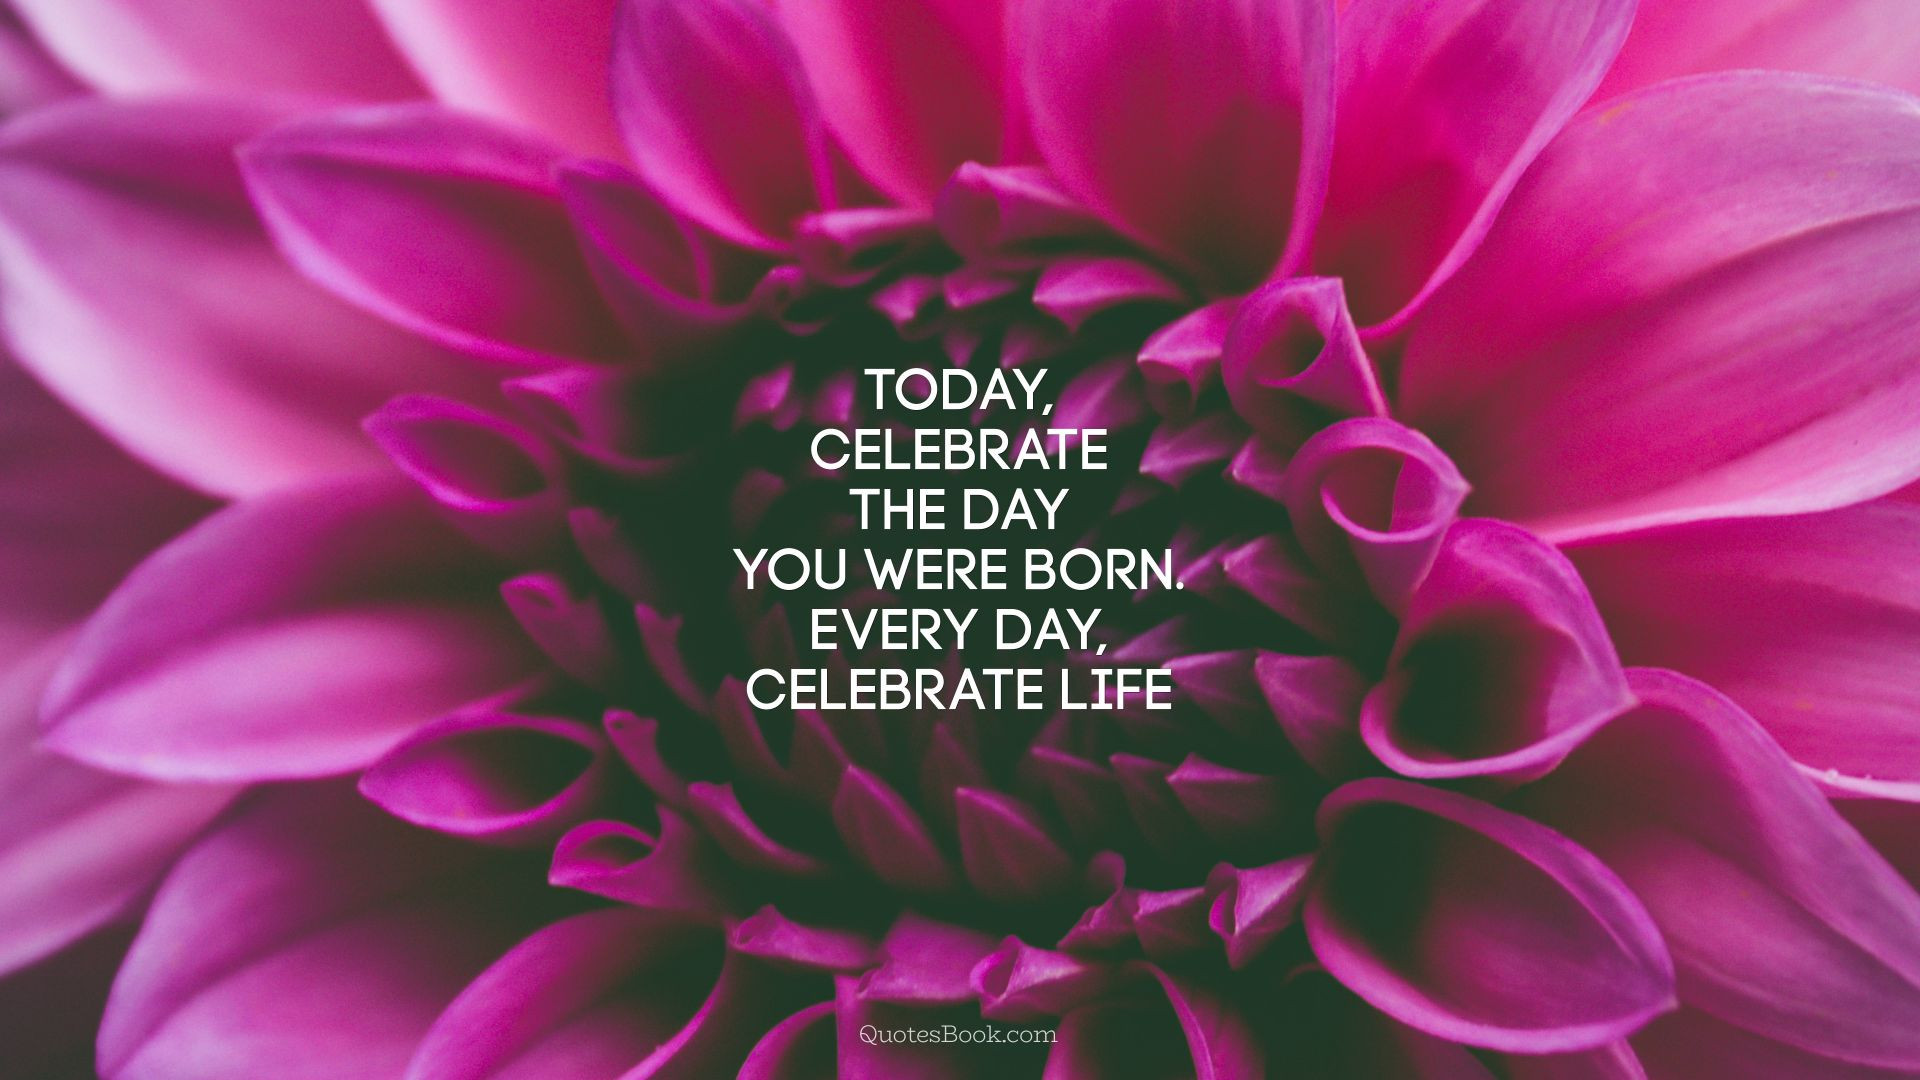 Celebrate Birthday Quotes
 Today celebrate the day you were born Every day